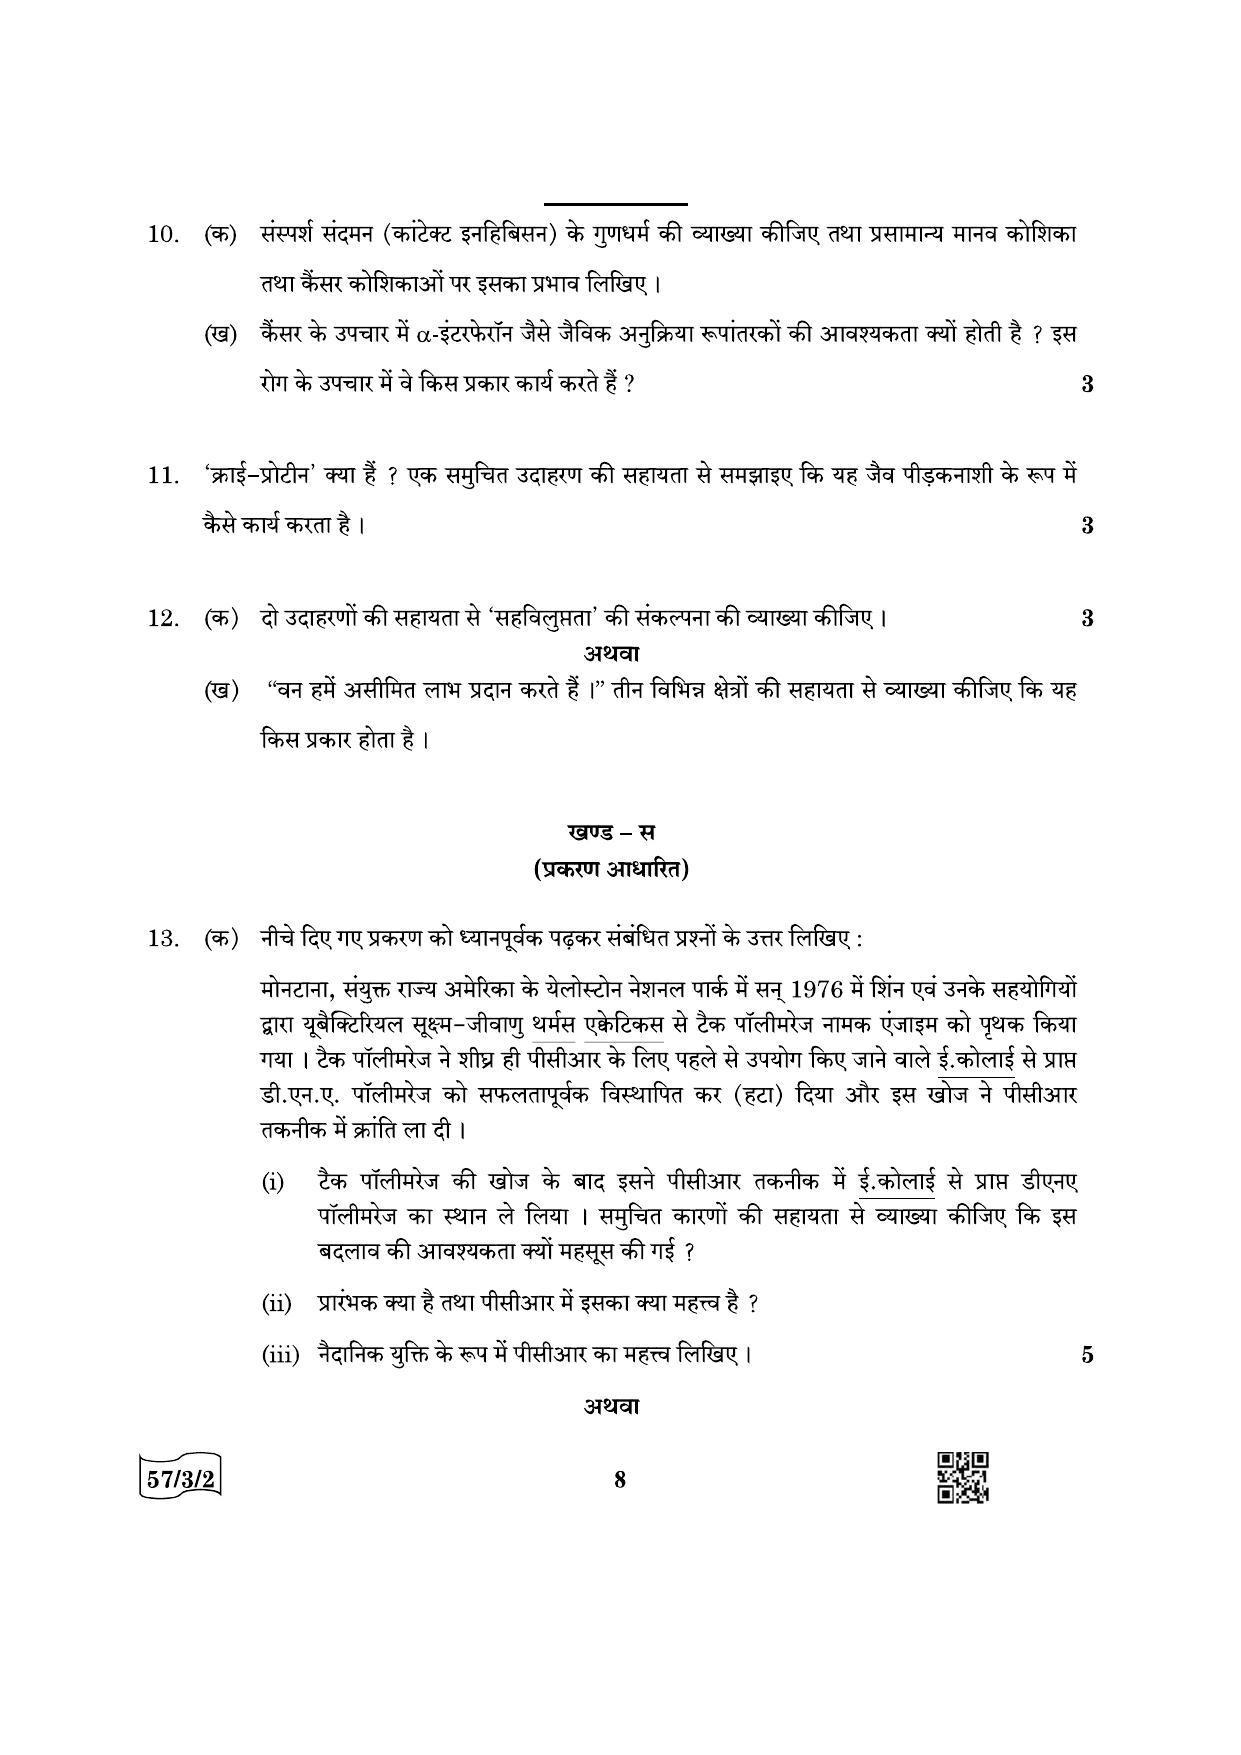 CBSE Class 12 57-3-2 Biology 2022 Question Paper - Page 8